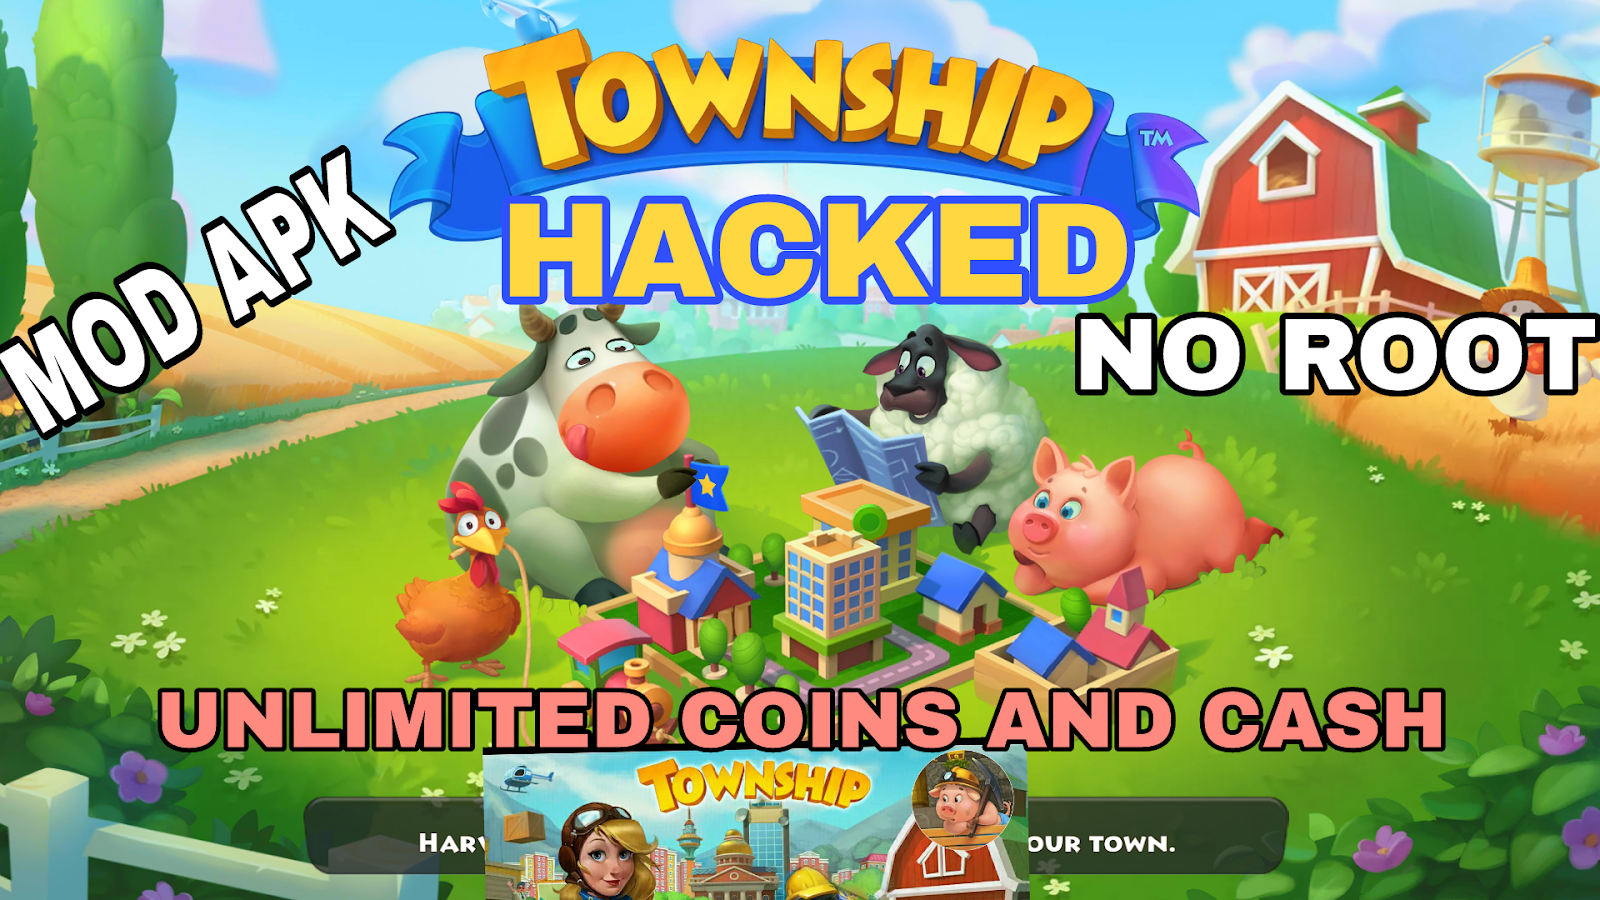 TOWNSHIP APK DOWNLOAD 2020 UPDATED VERSION FOR ANDROID / iOS.